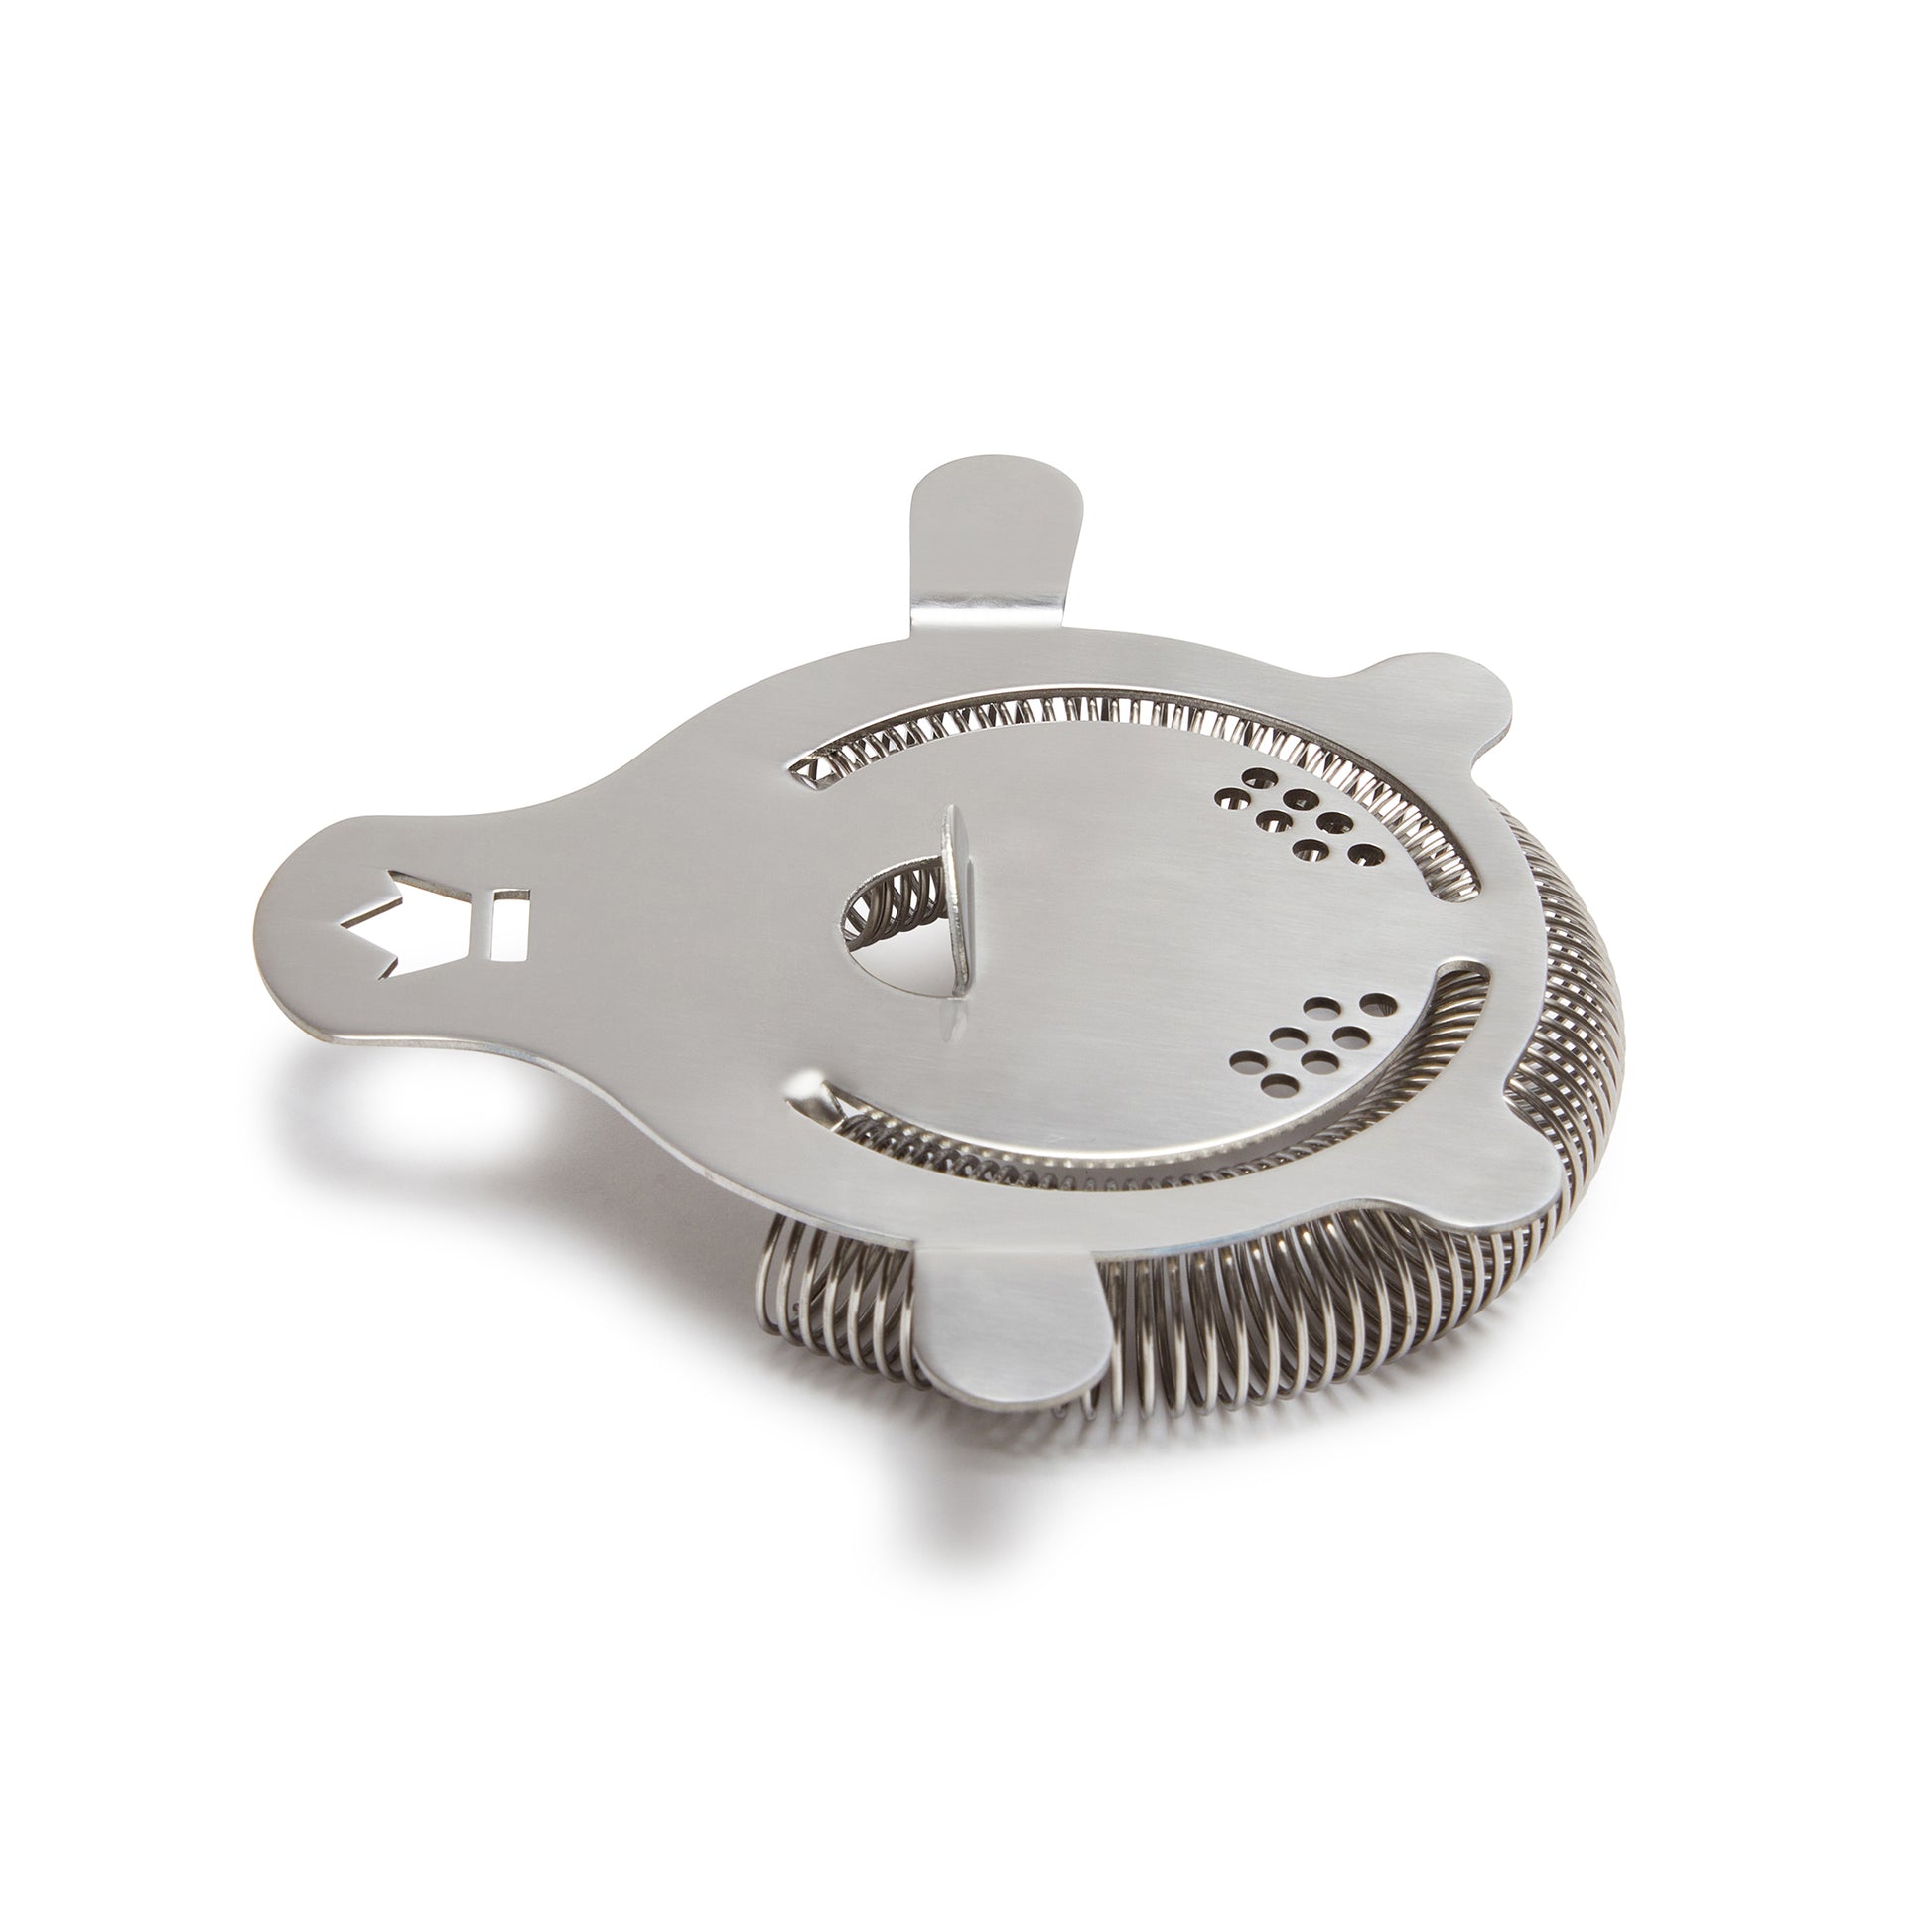 BUSWELL® BOBTAIL COCKTAIL STRAINER – STAINLESS STEEL